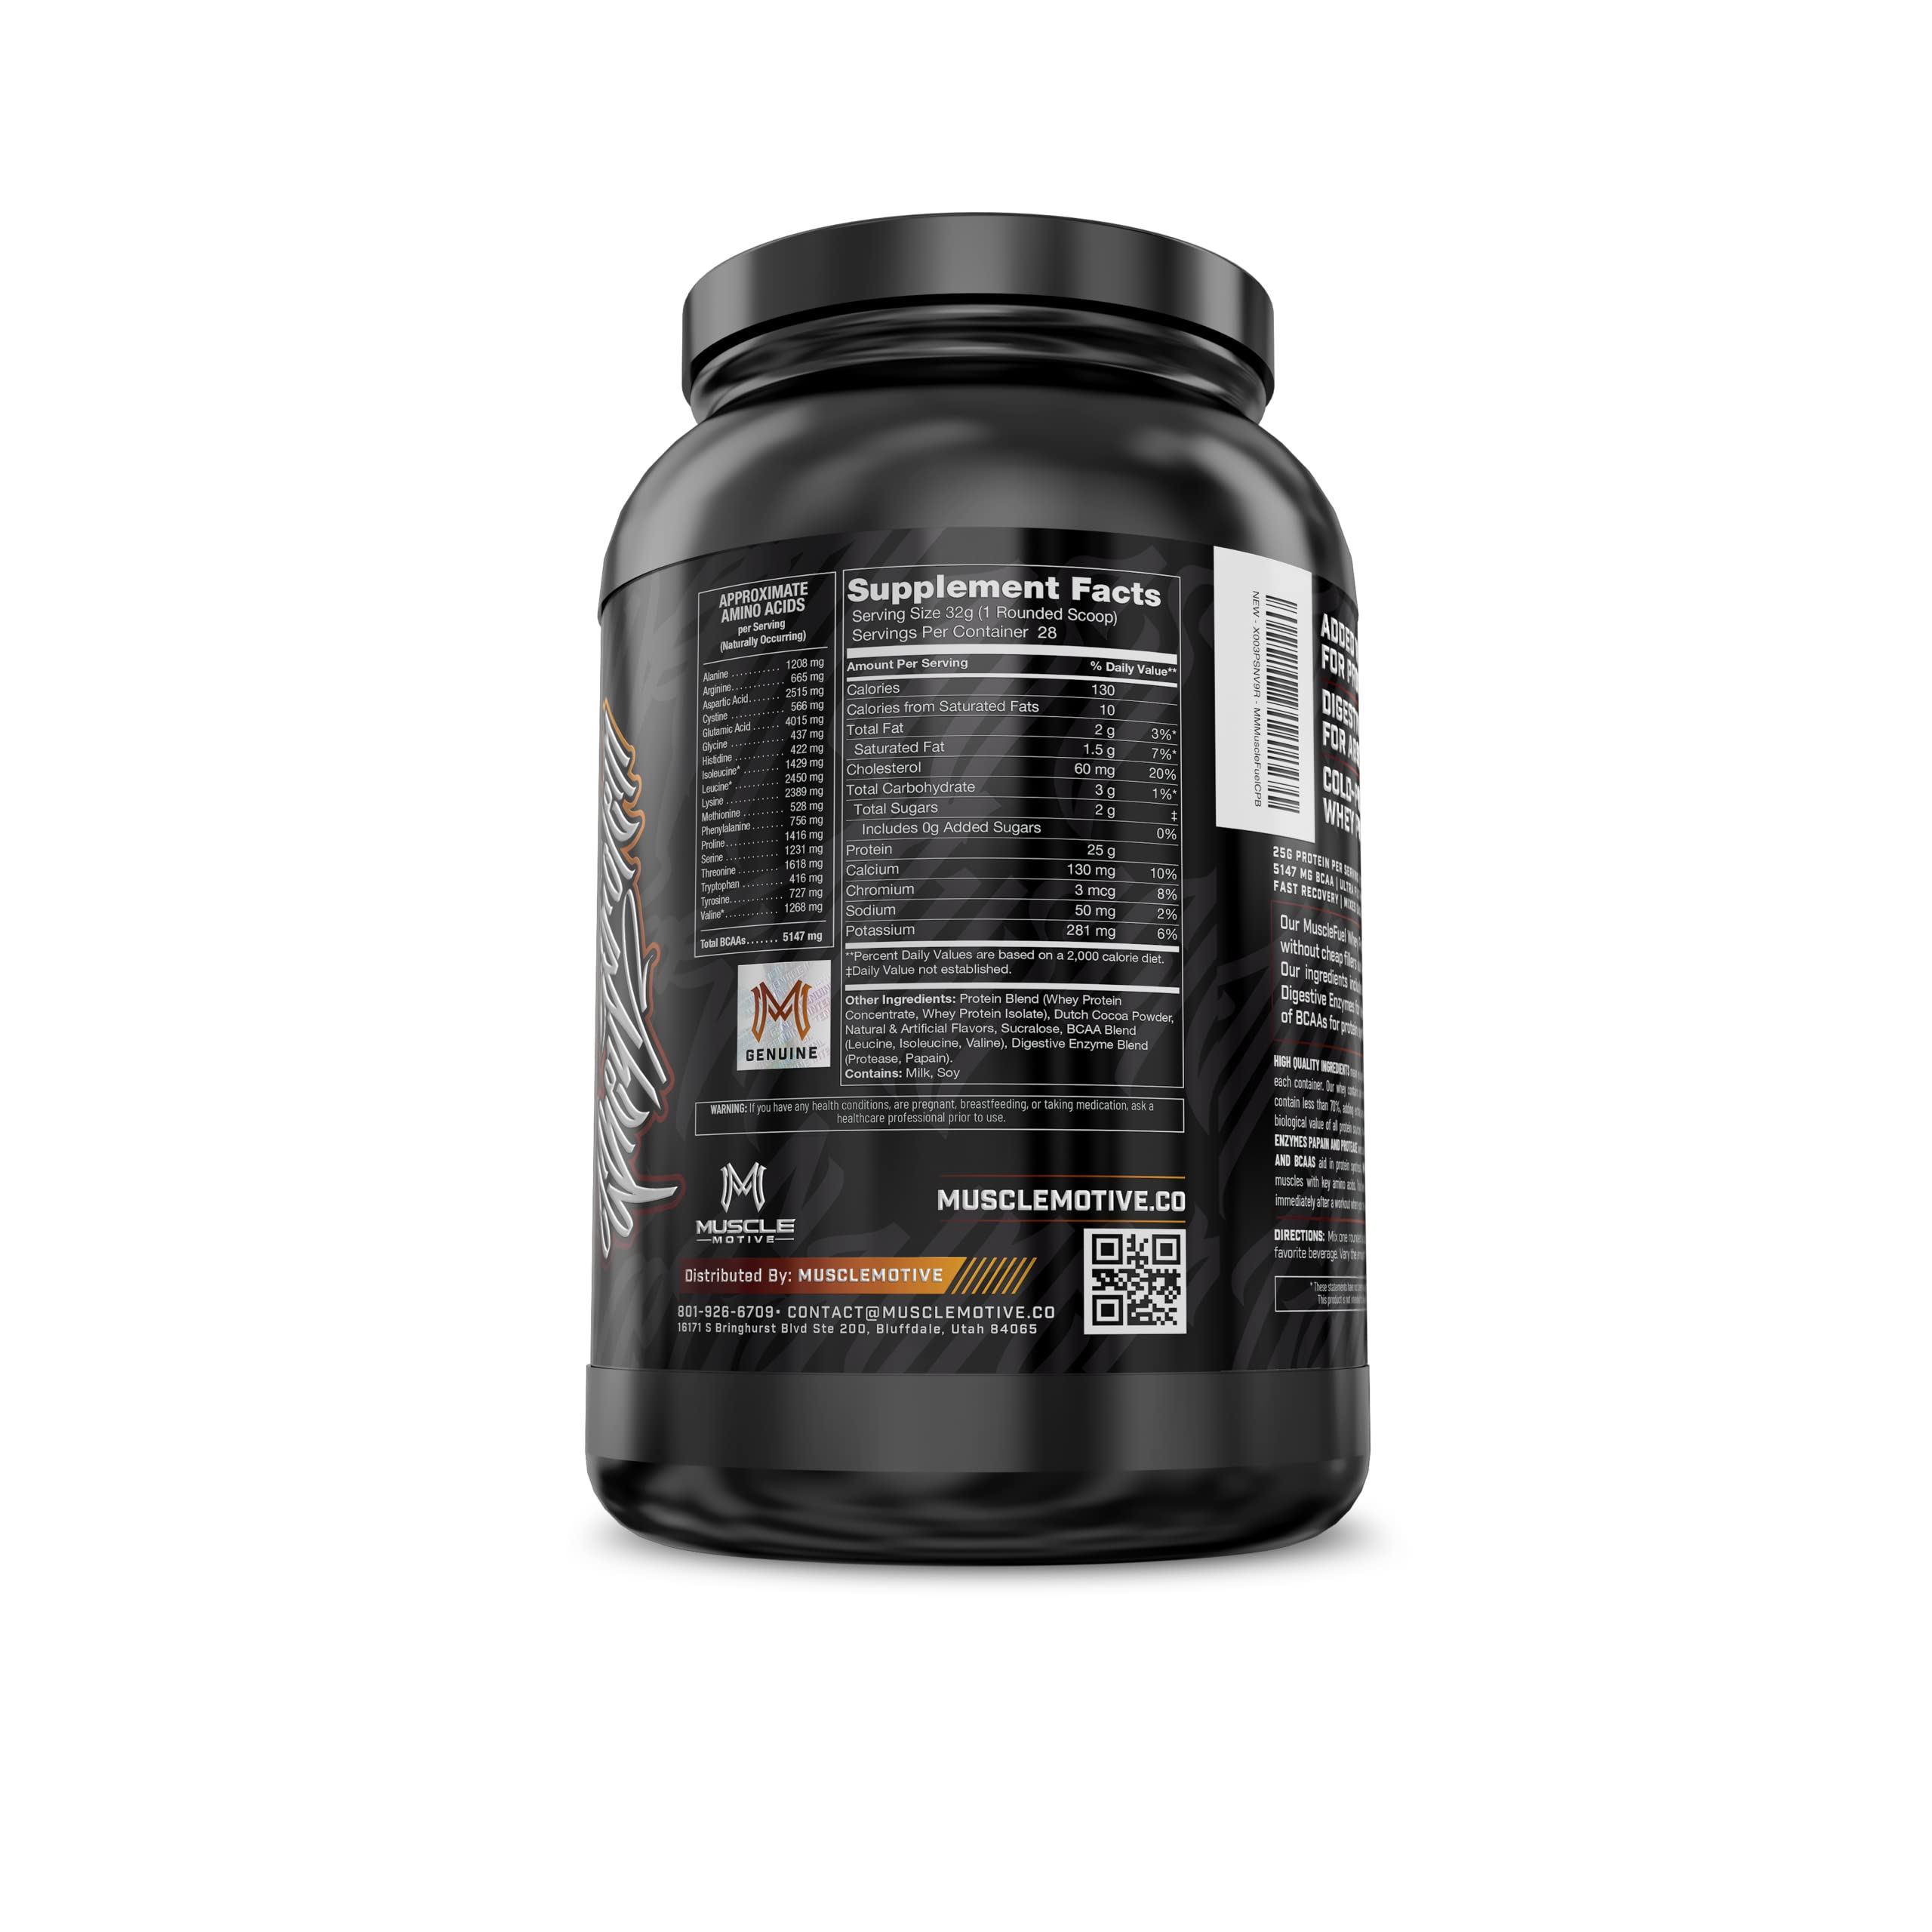 MuscleMotive MuscleFuel - 100% Whey Protein Powder with Isolate - 25g Protein Blend with BCAAs & Digestive Enzymes - Chocolate Peanut Butter Flavor - 2 LB